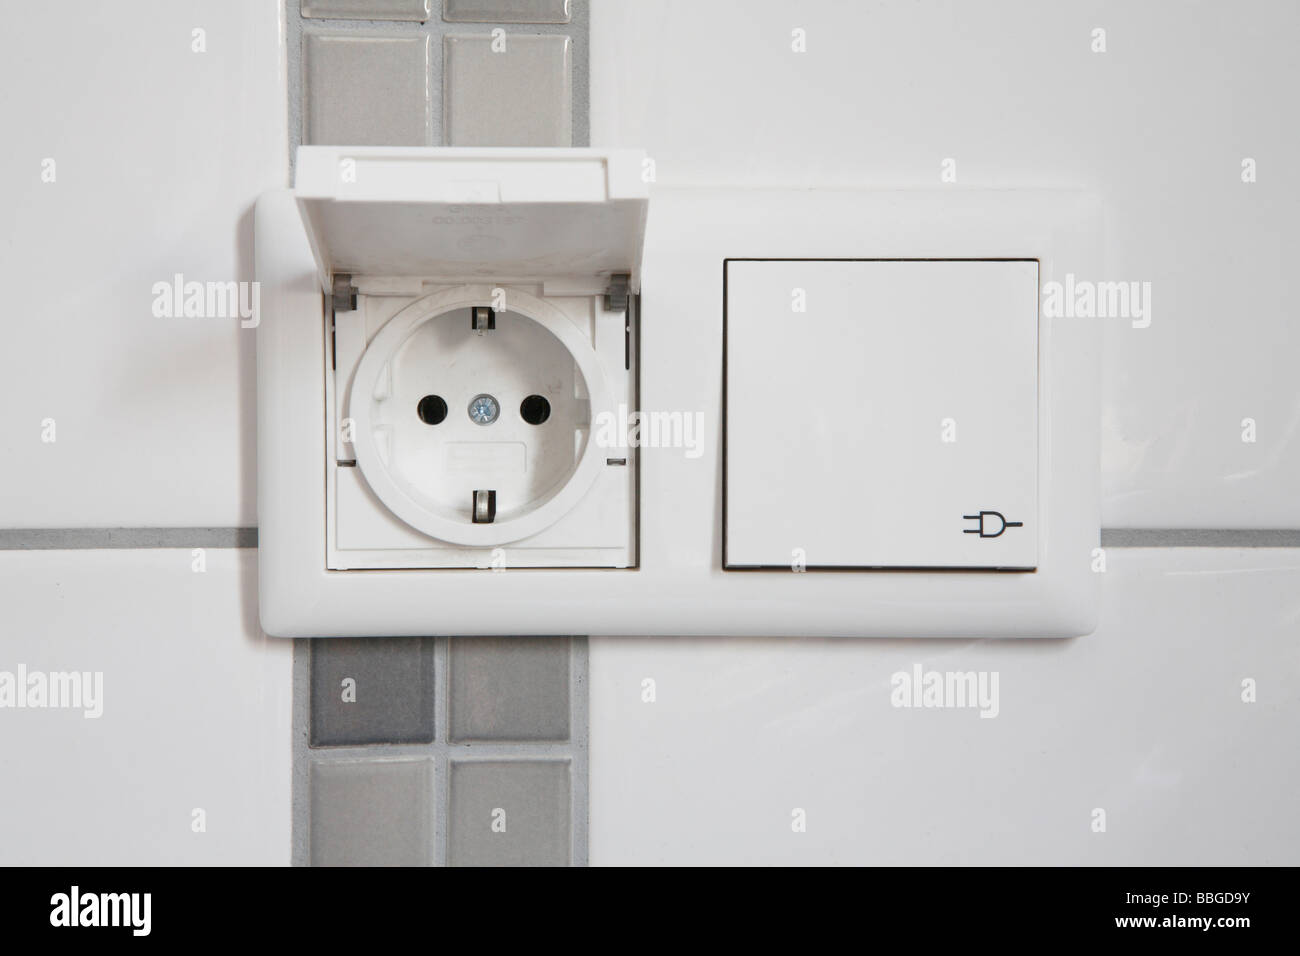 Outlets with protective covers Stock Photo